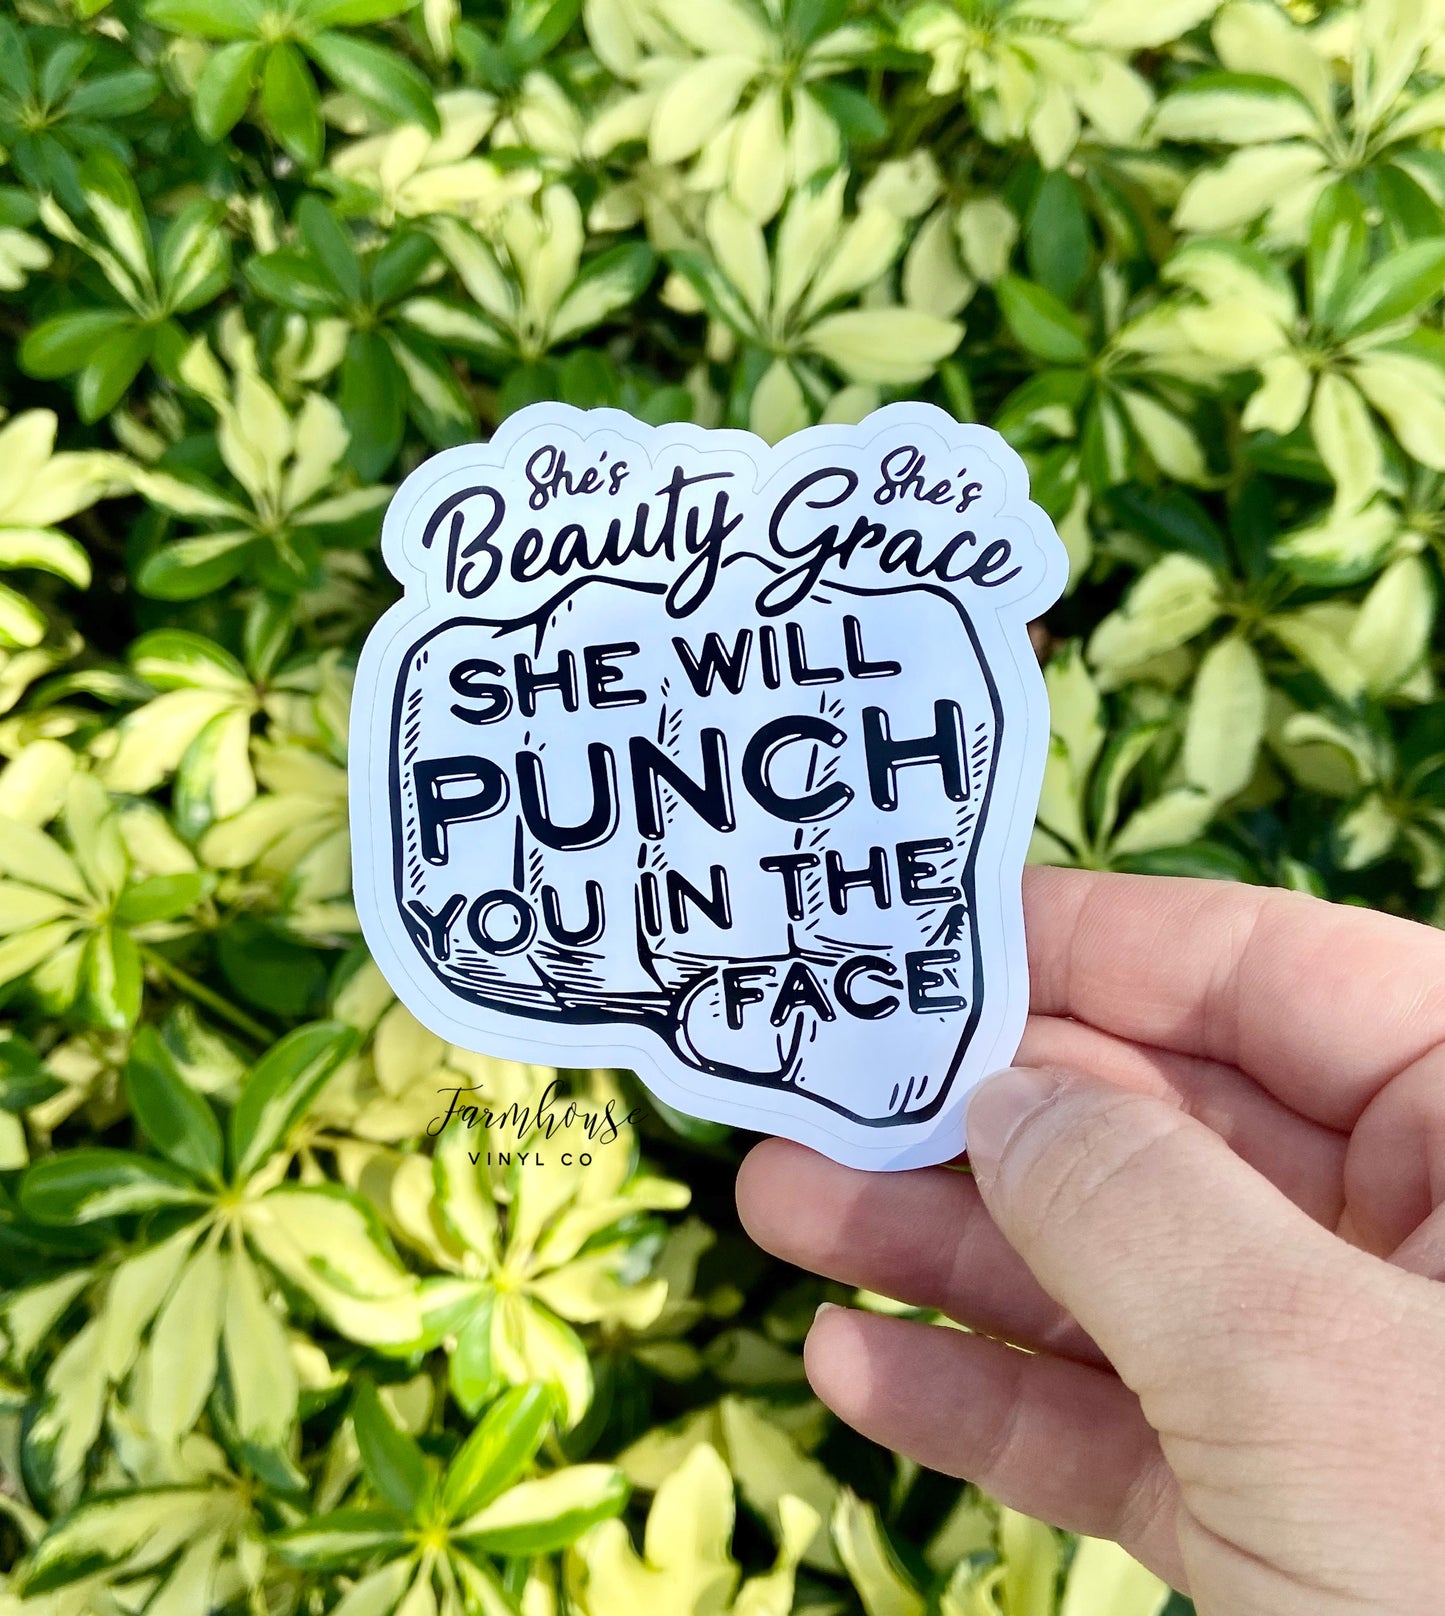 She's Beauty She's Grace She Will Punch You in the Face Sticker - Farmhouse Vinyl Co